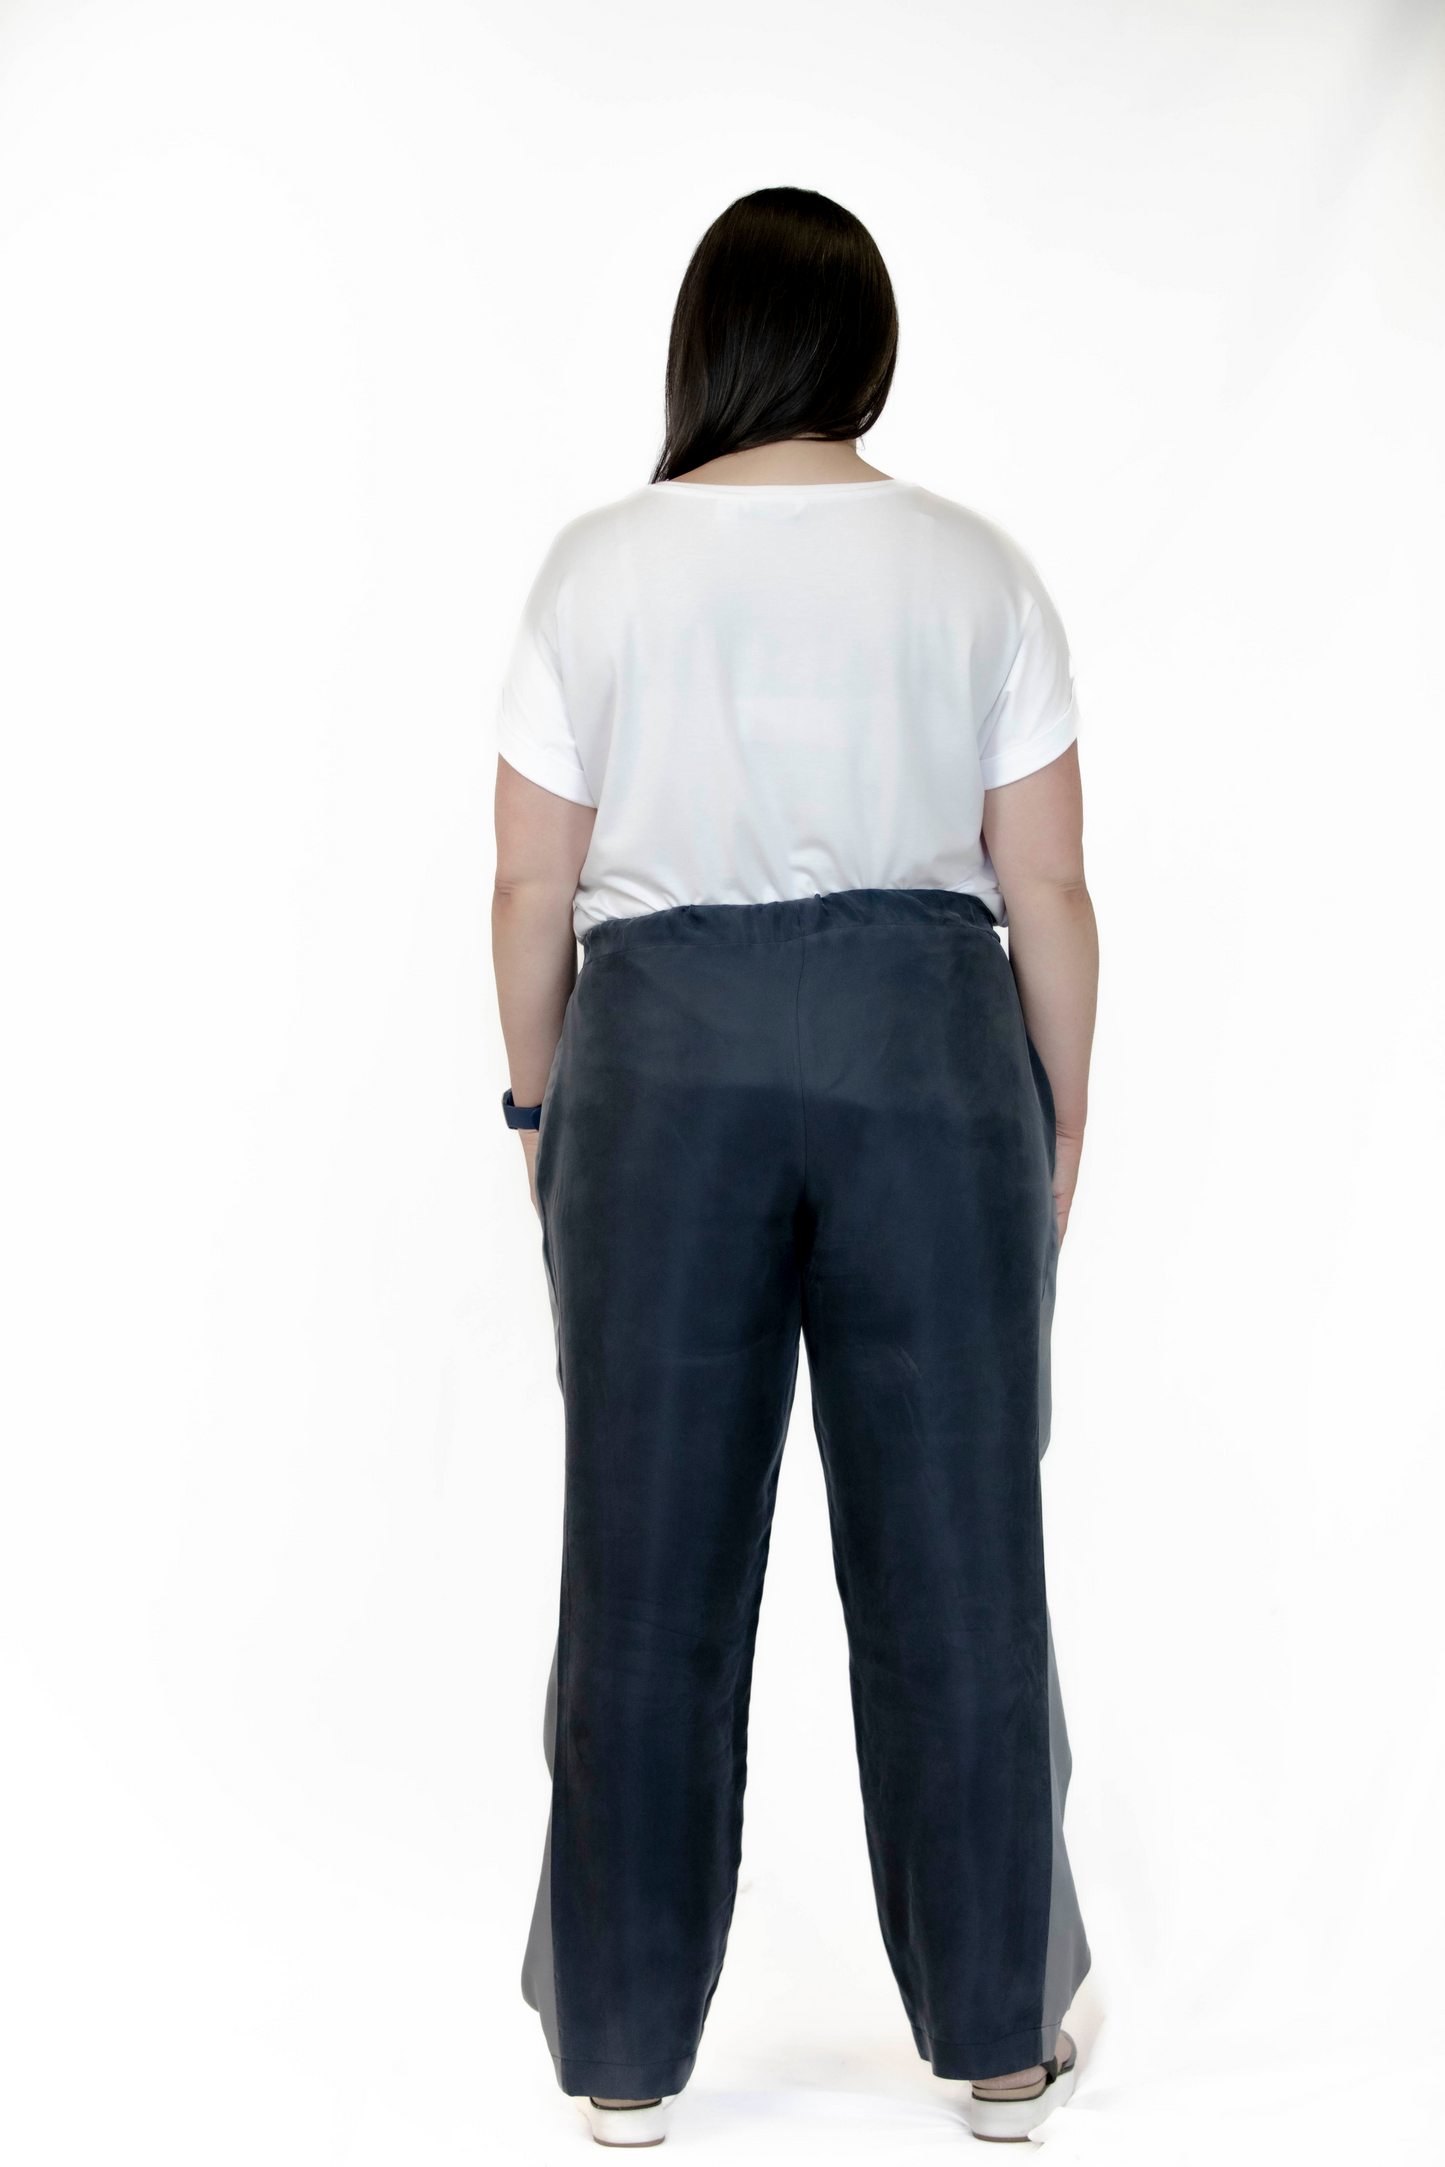 Plus size joggers sewing pattern